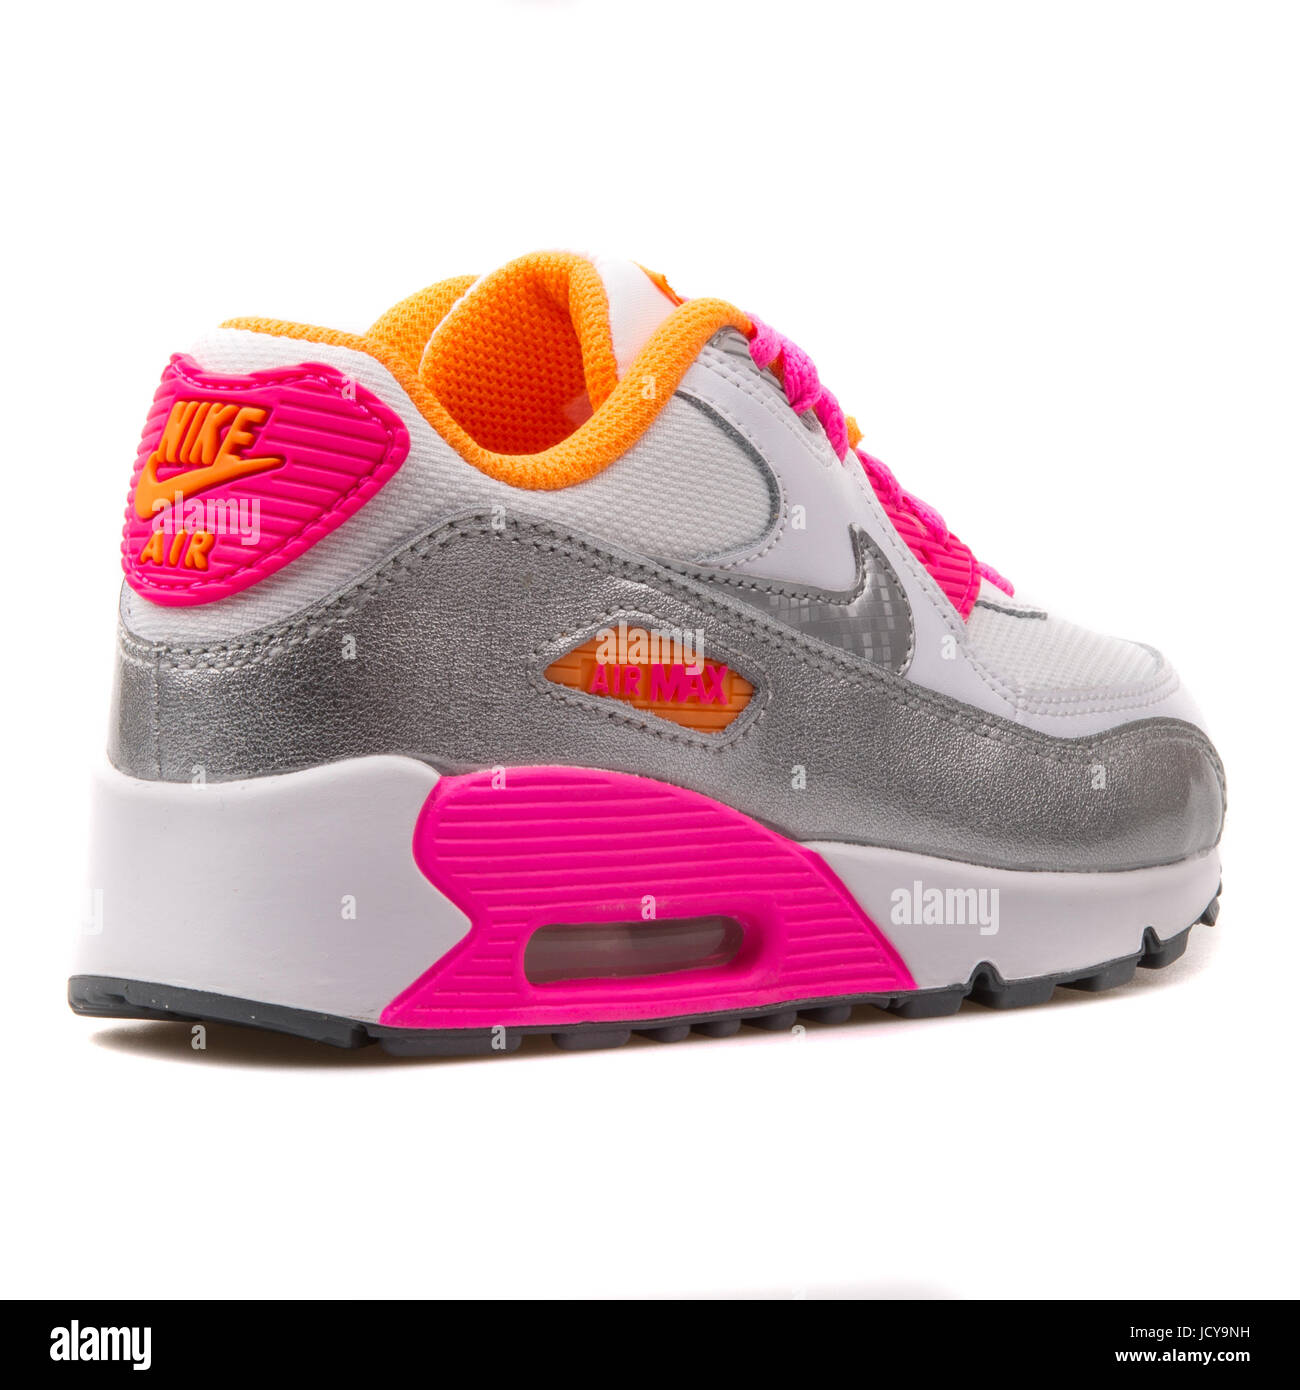 Kids Nike Air Max High Resolution Stock Photography and Images - Alamy